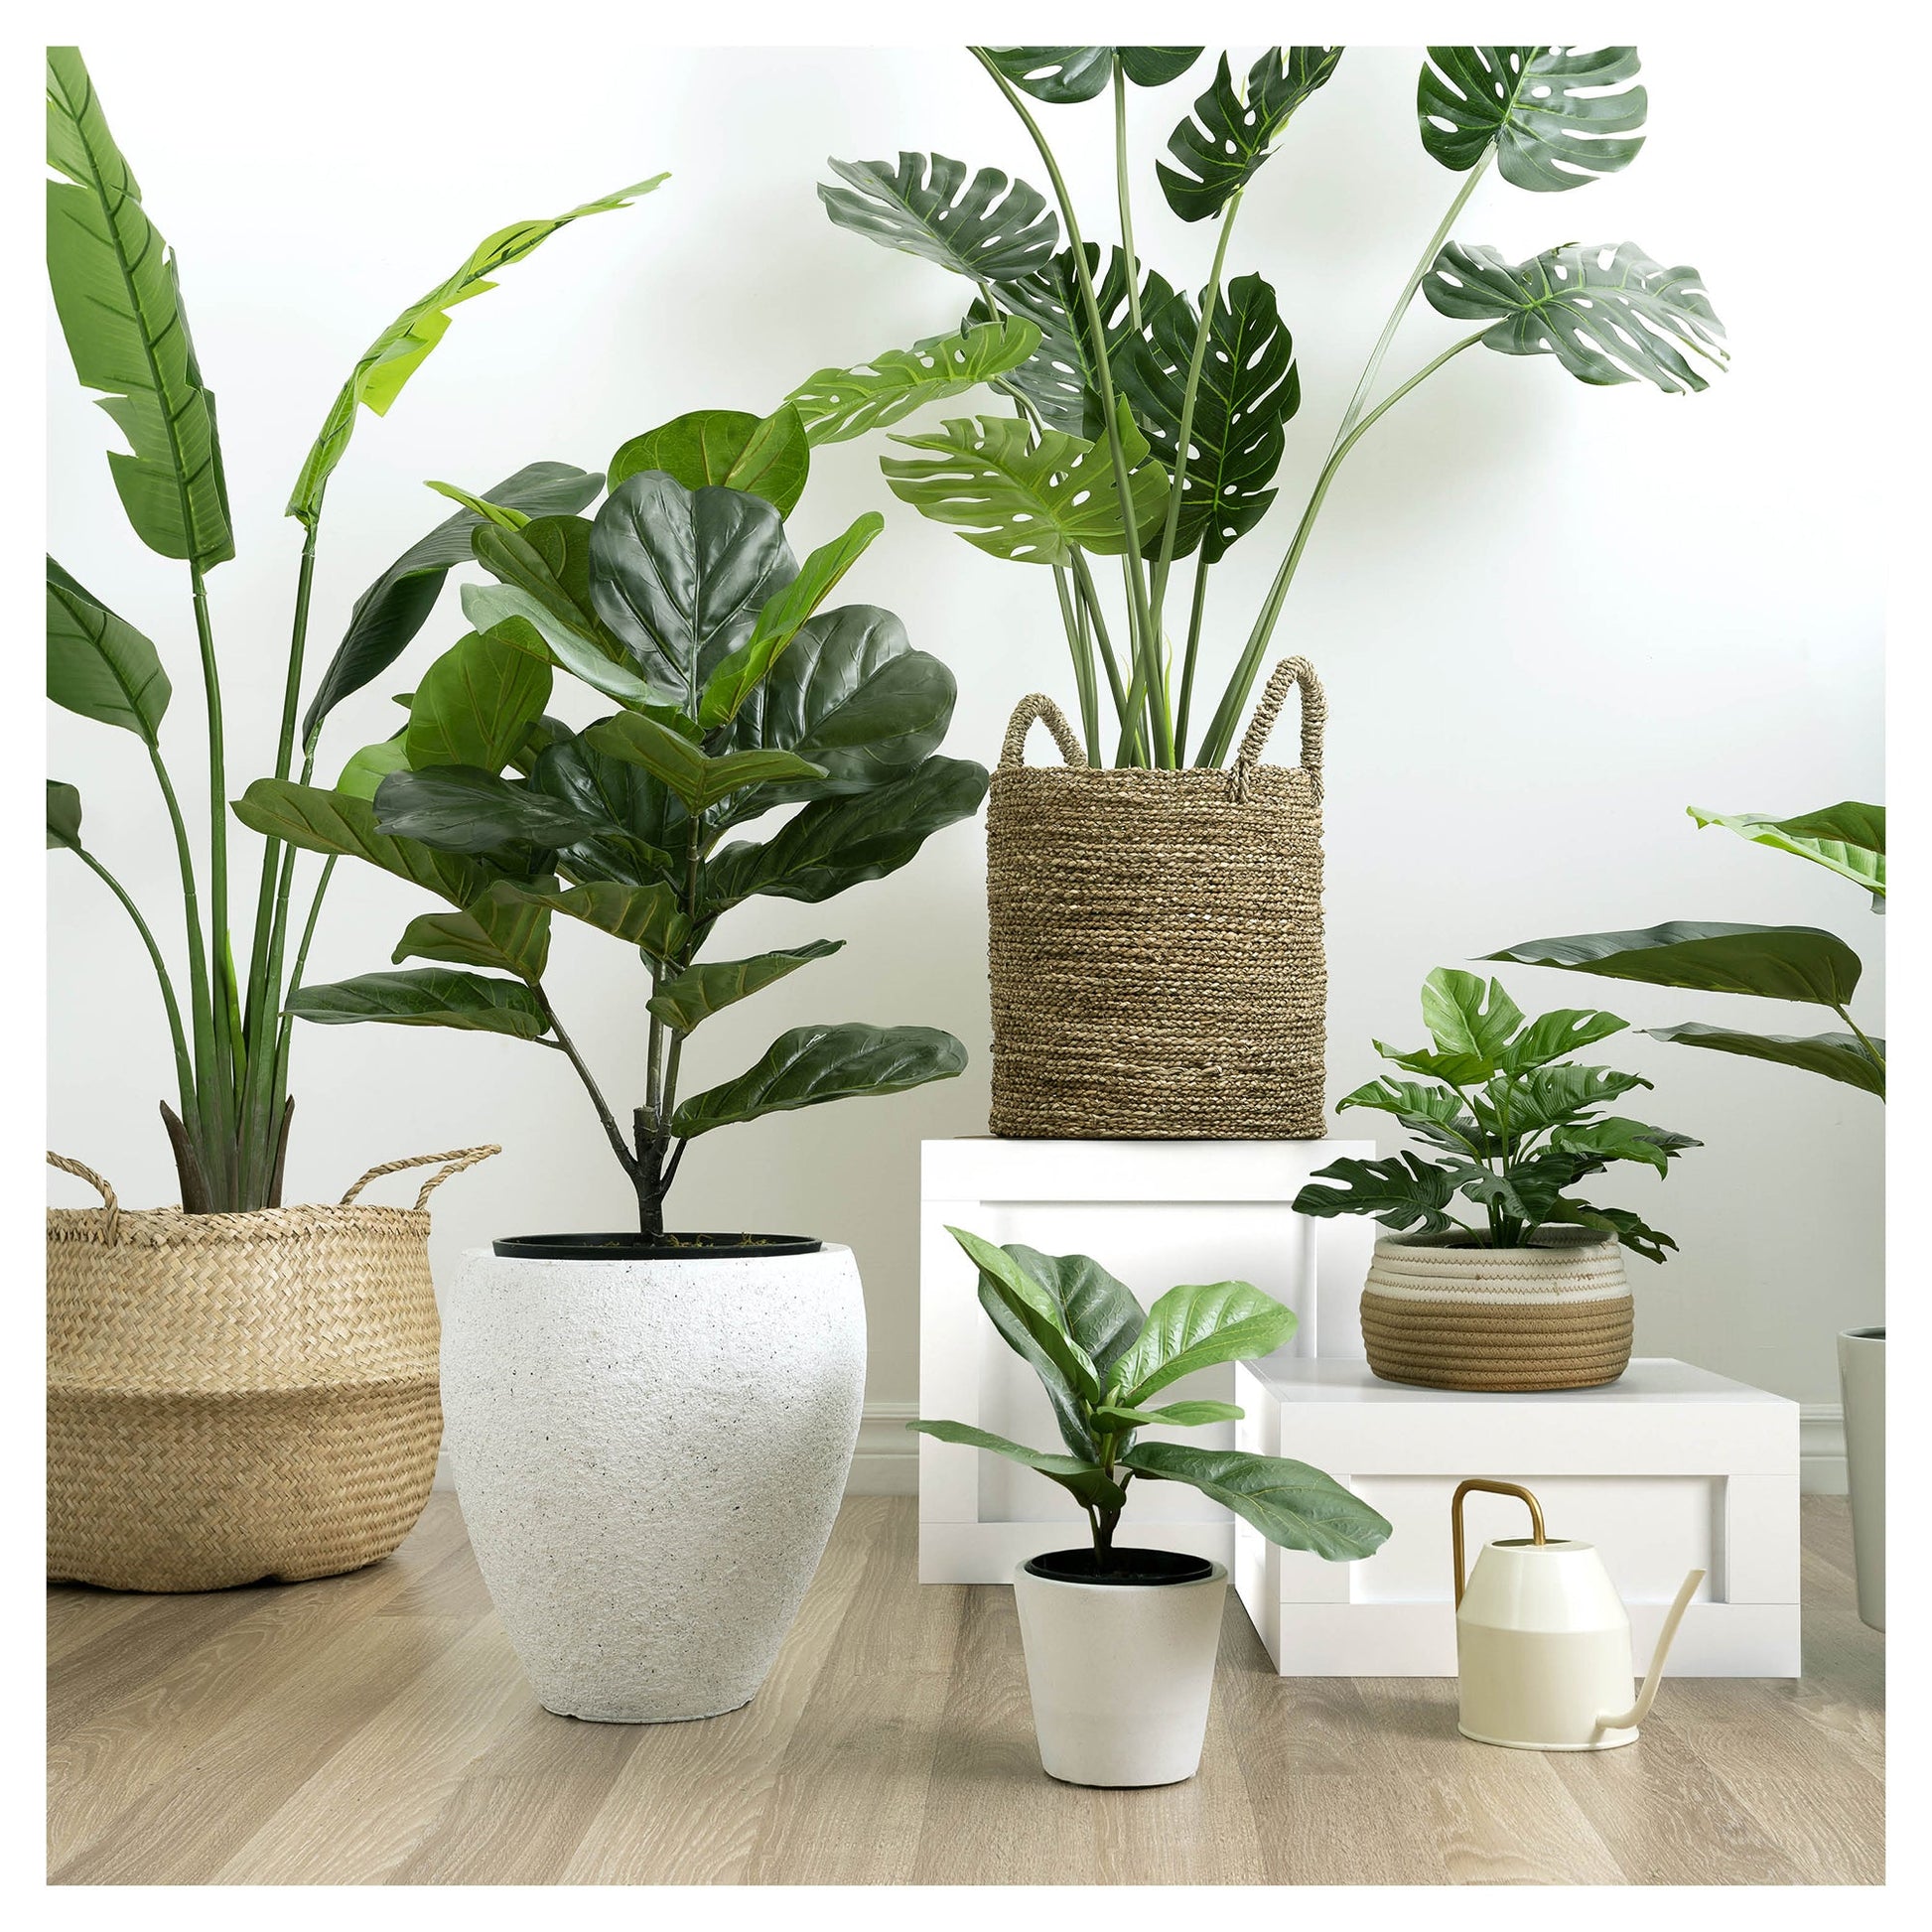 Artificial 35 in. Fiddle Leaf Indoor and Outdoor Plants